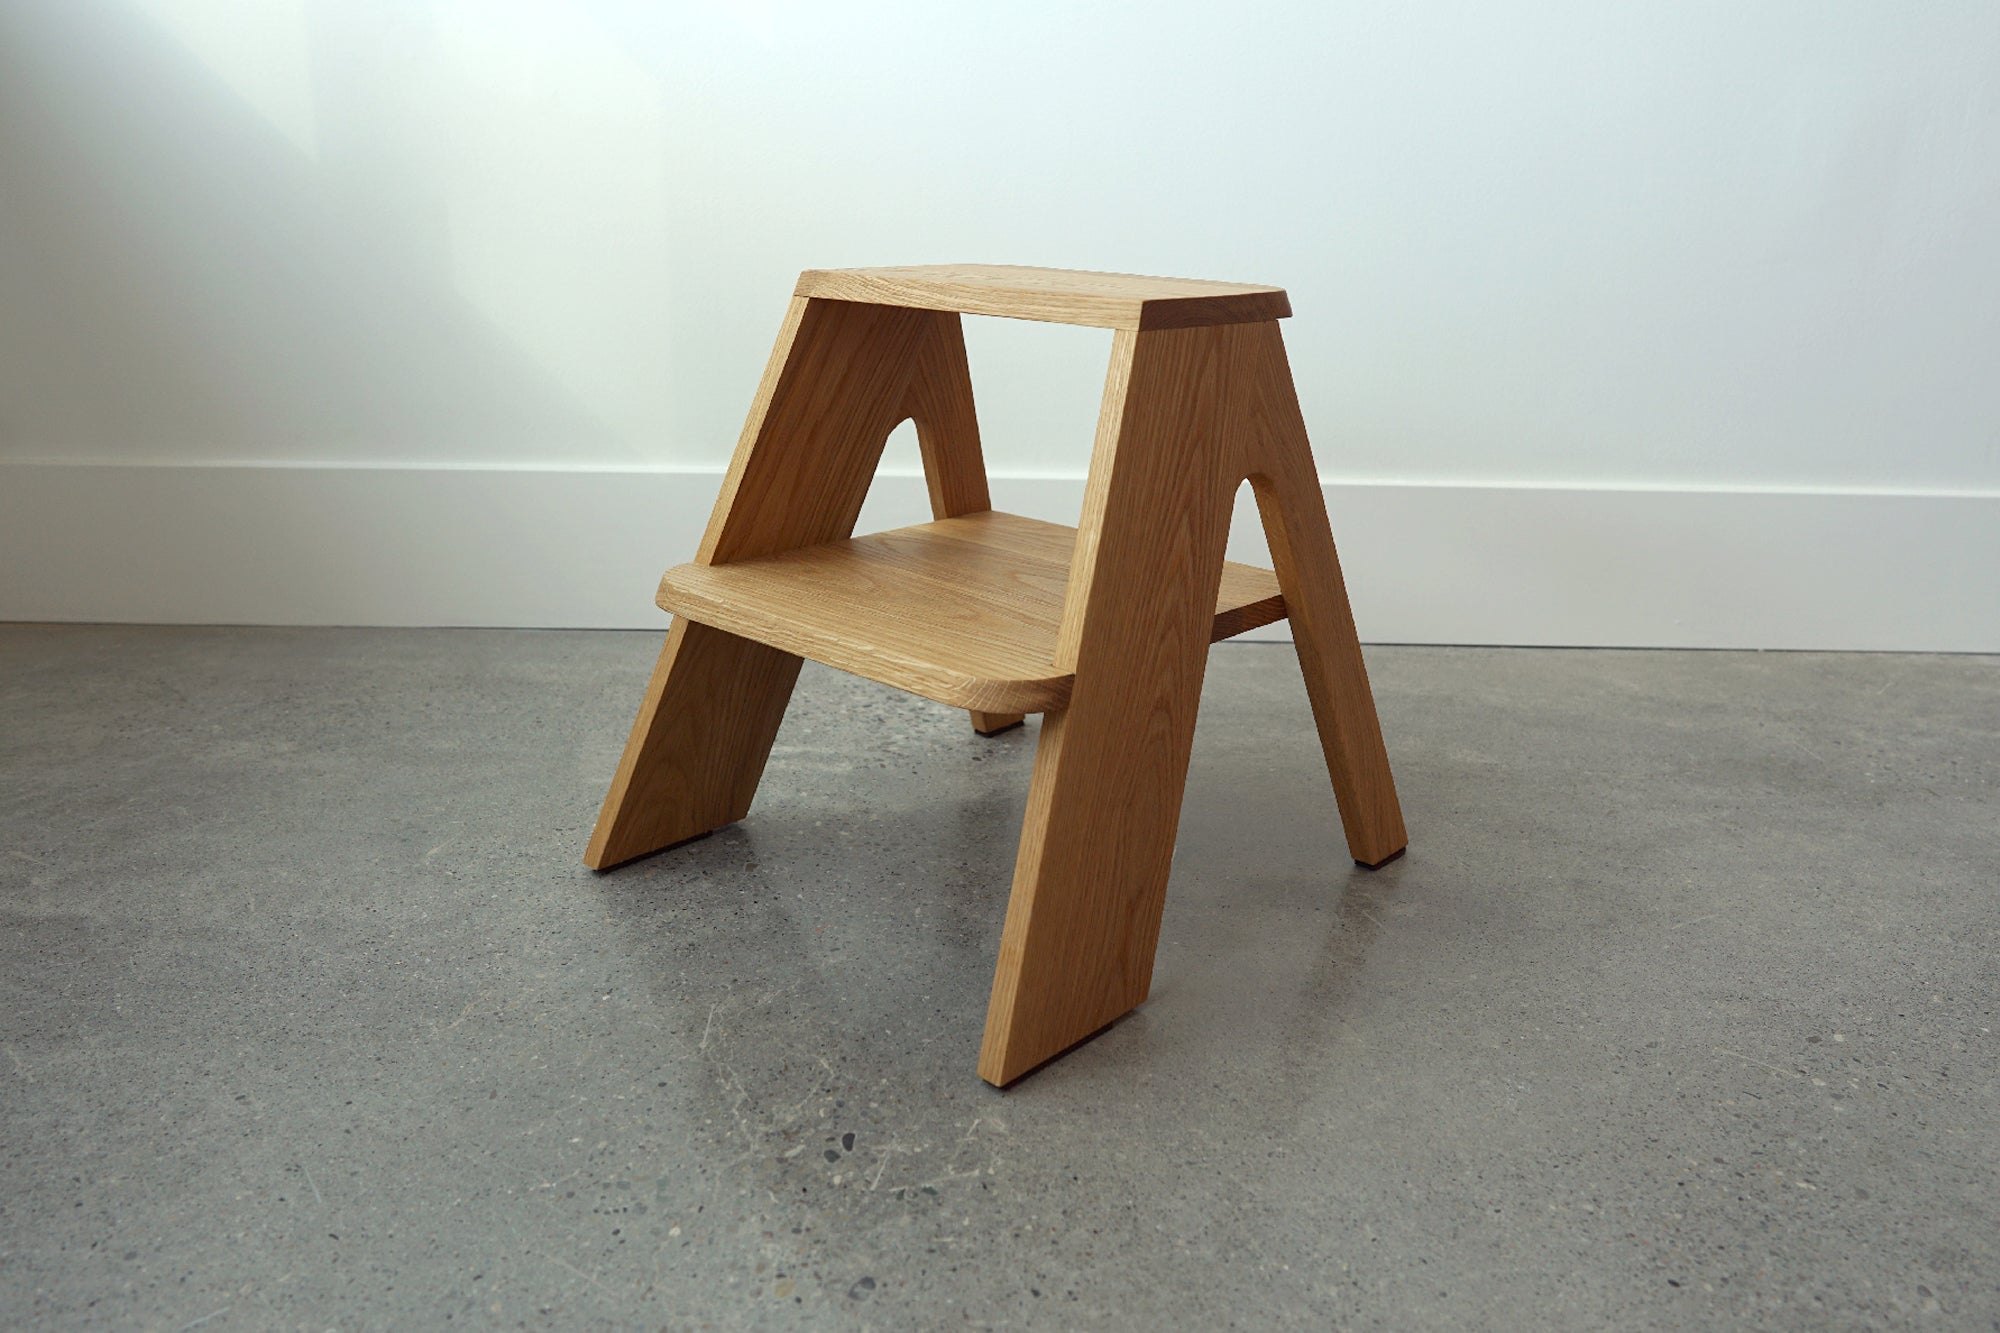 The 'Two Step' Stool